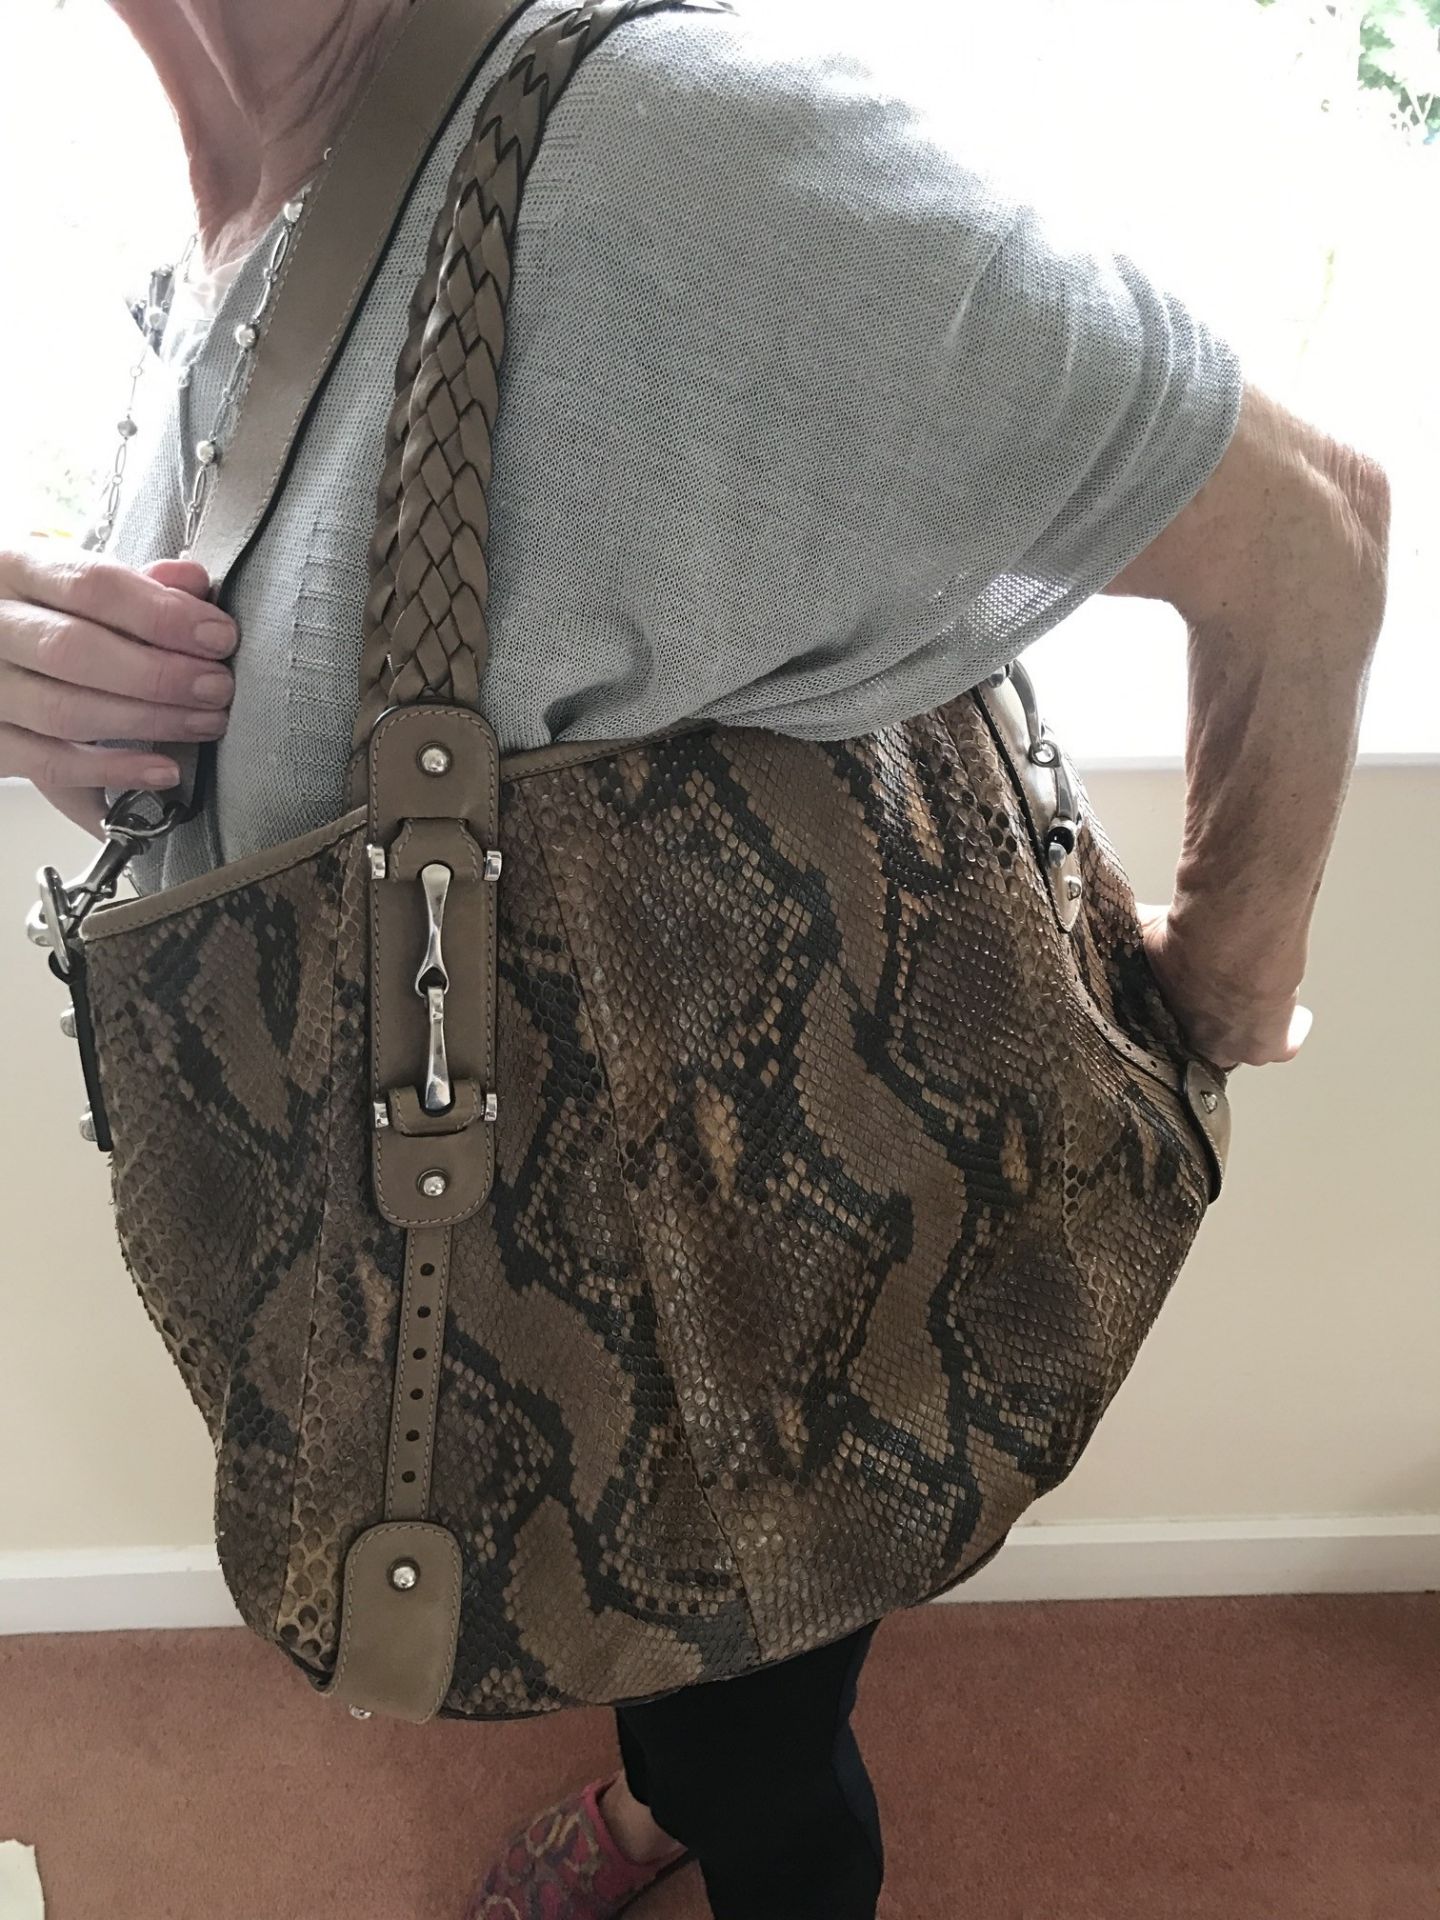 RARE GUCCI SNAKESKIN HANDBAG WITH DUSTBAG IN GREAT CONDITION - Image 2 of 15